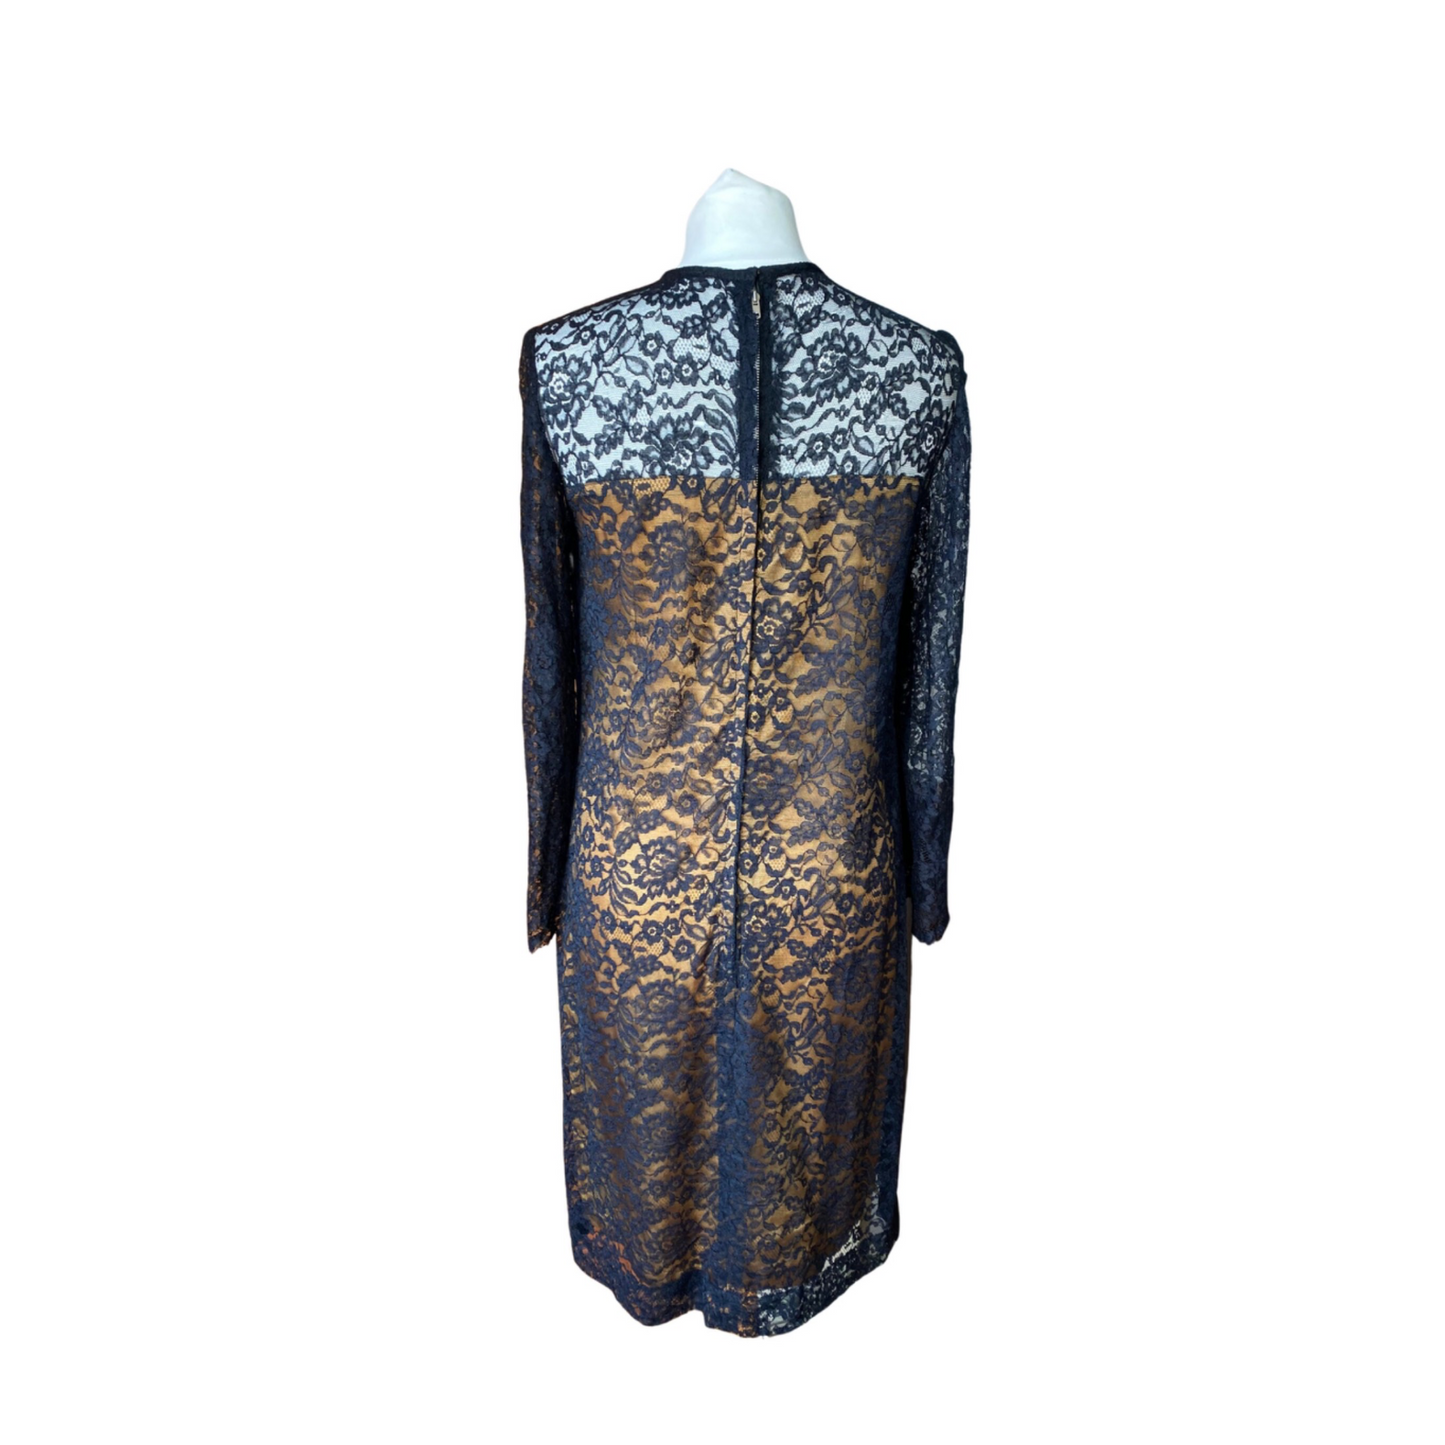 60s black lace shift dress.Perfect for a party or elegant  event. Approx  U.K. size  8-10